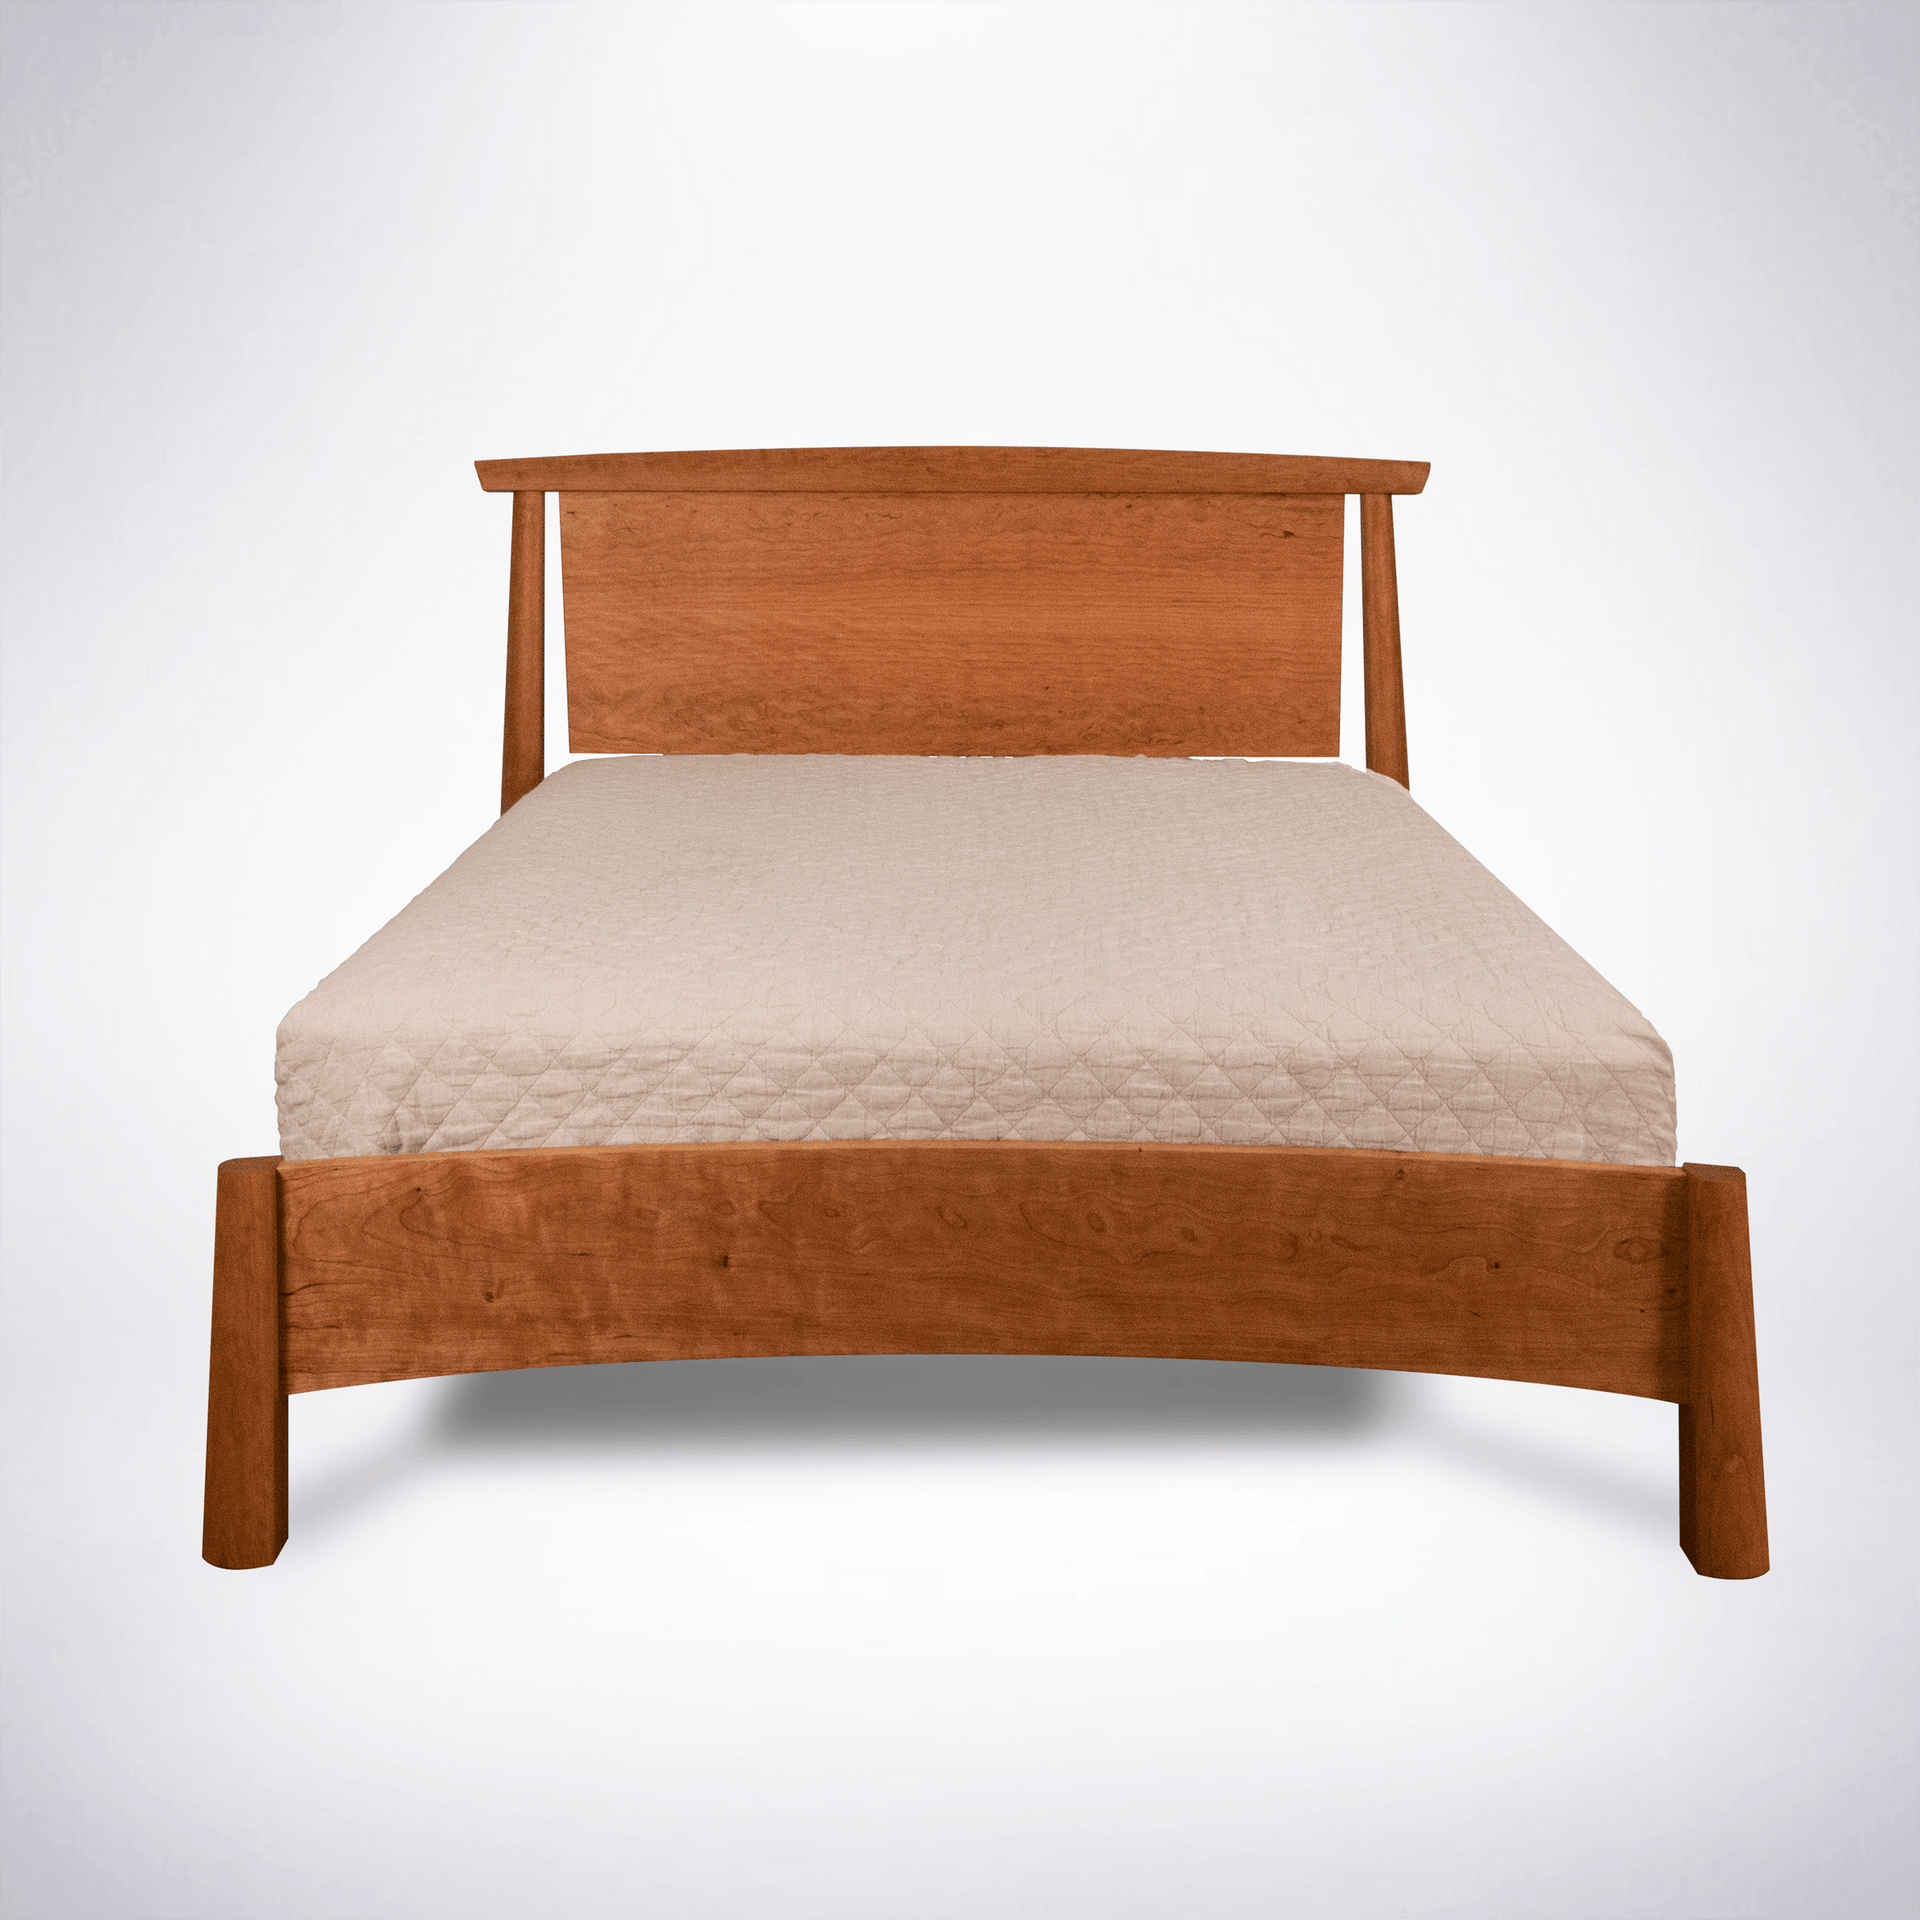 Bed made in USA wood furniture Columbus Ohio